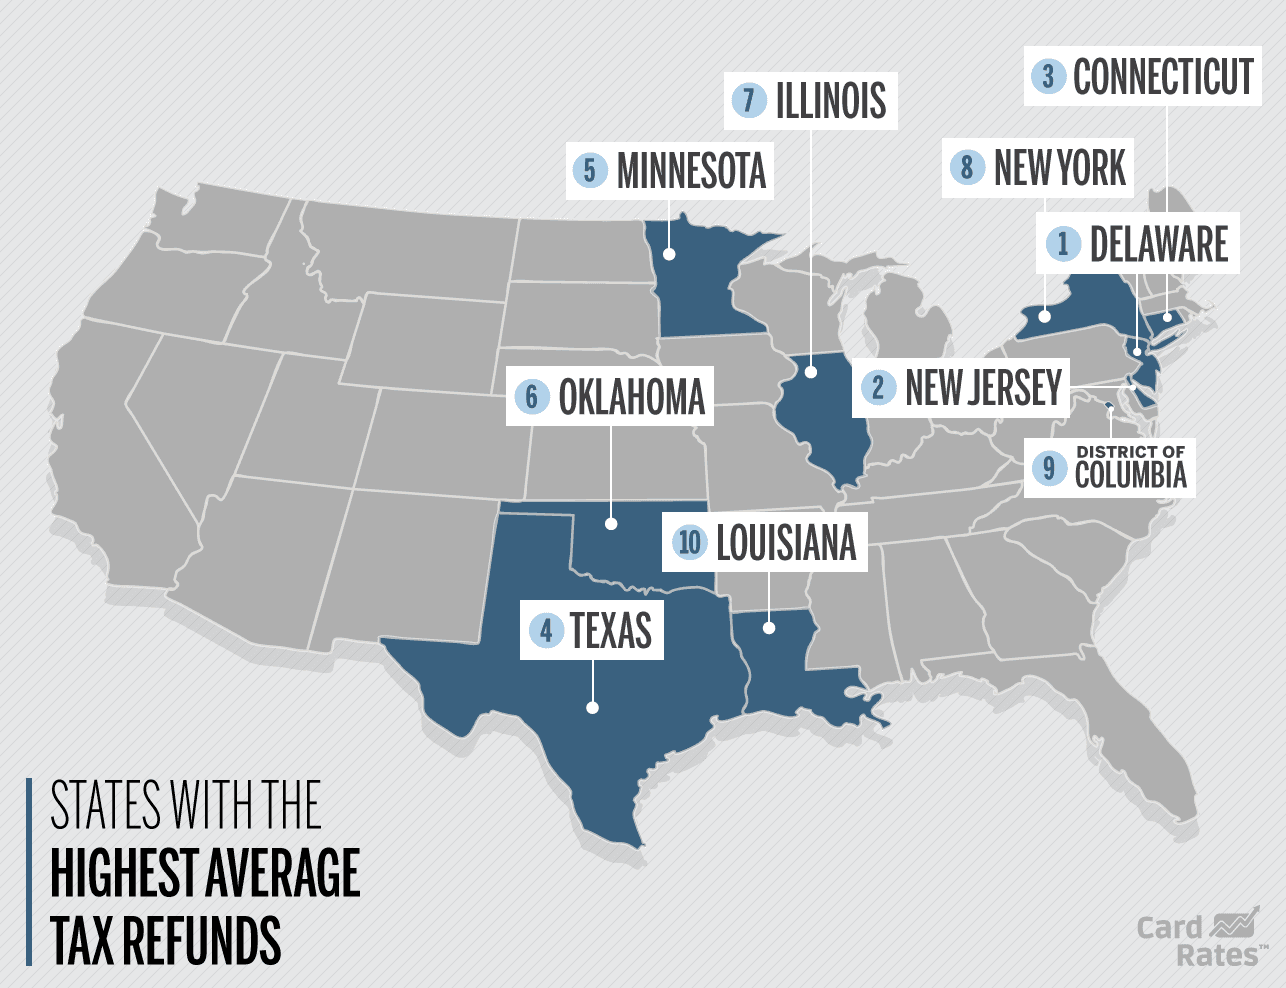 10 States with the Highest Average Tax Refunds